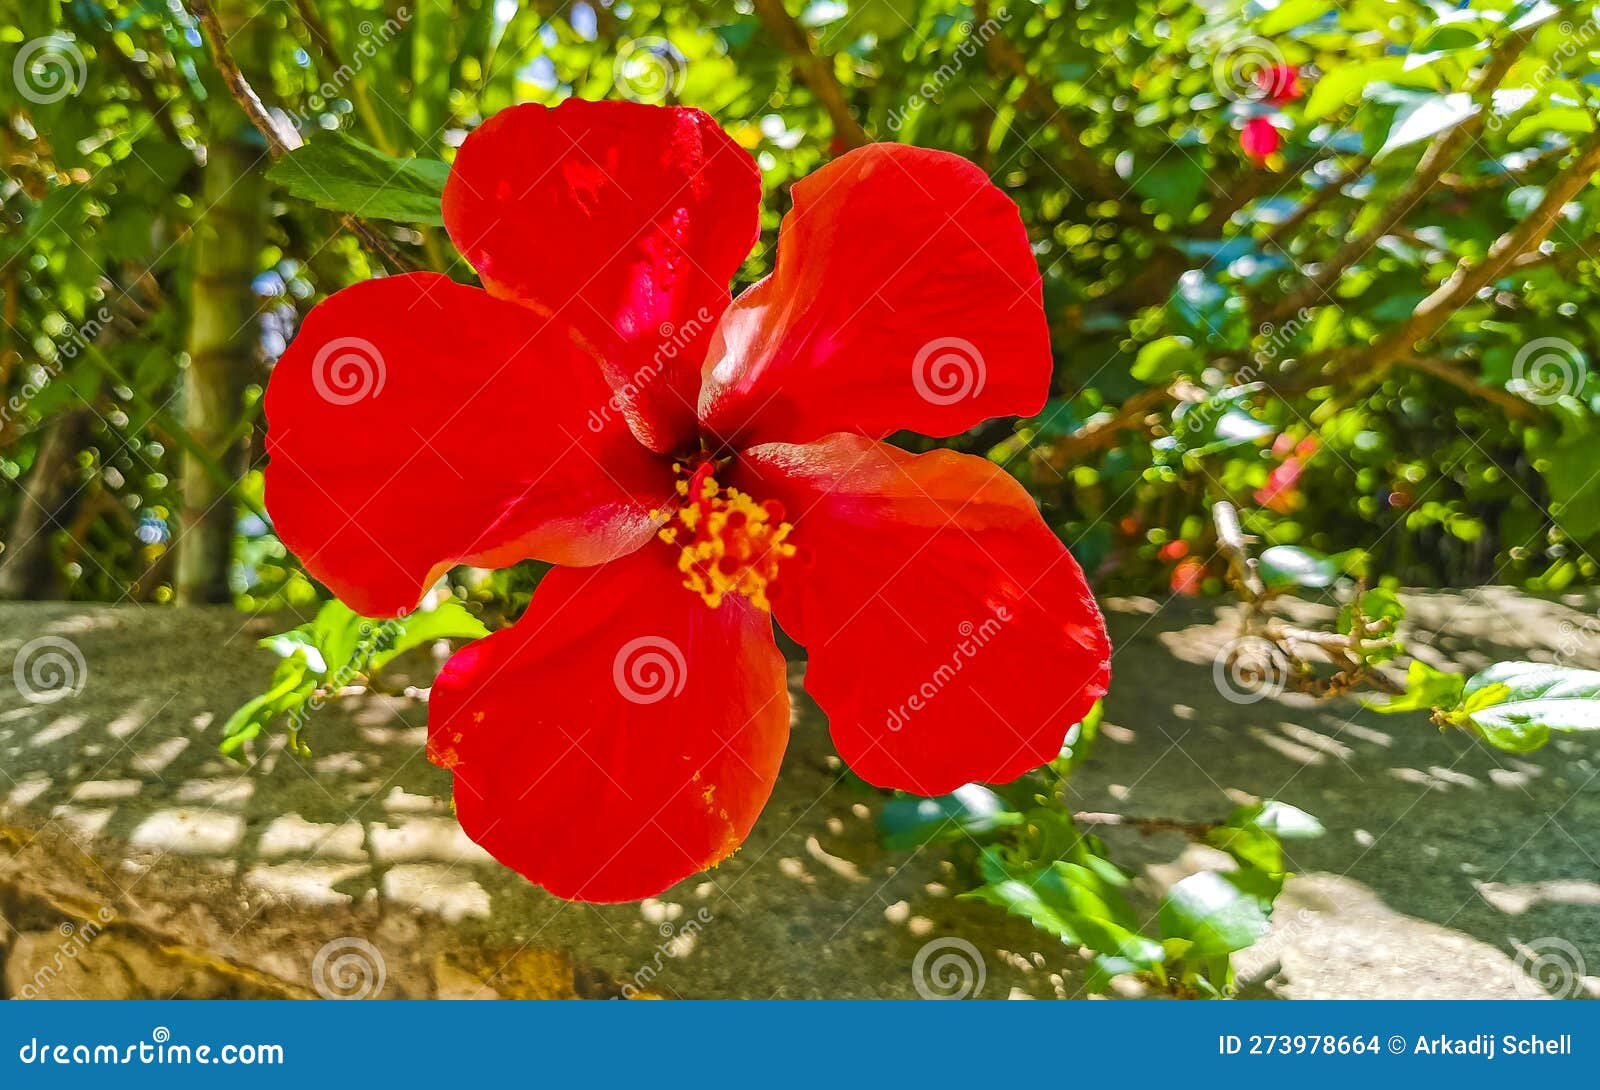 Is The Hibiscus a Shrub, Tree, or Other Type of Plant?